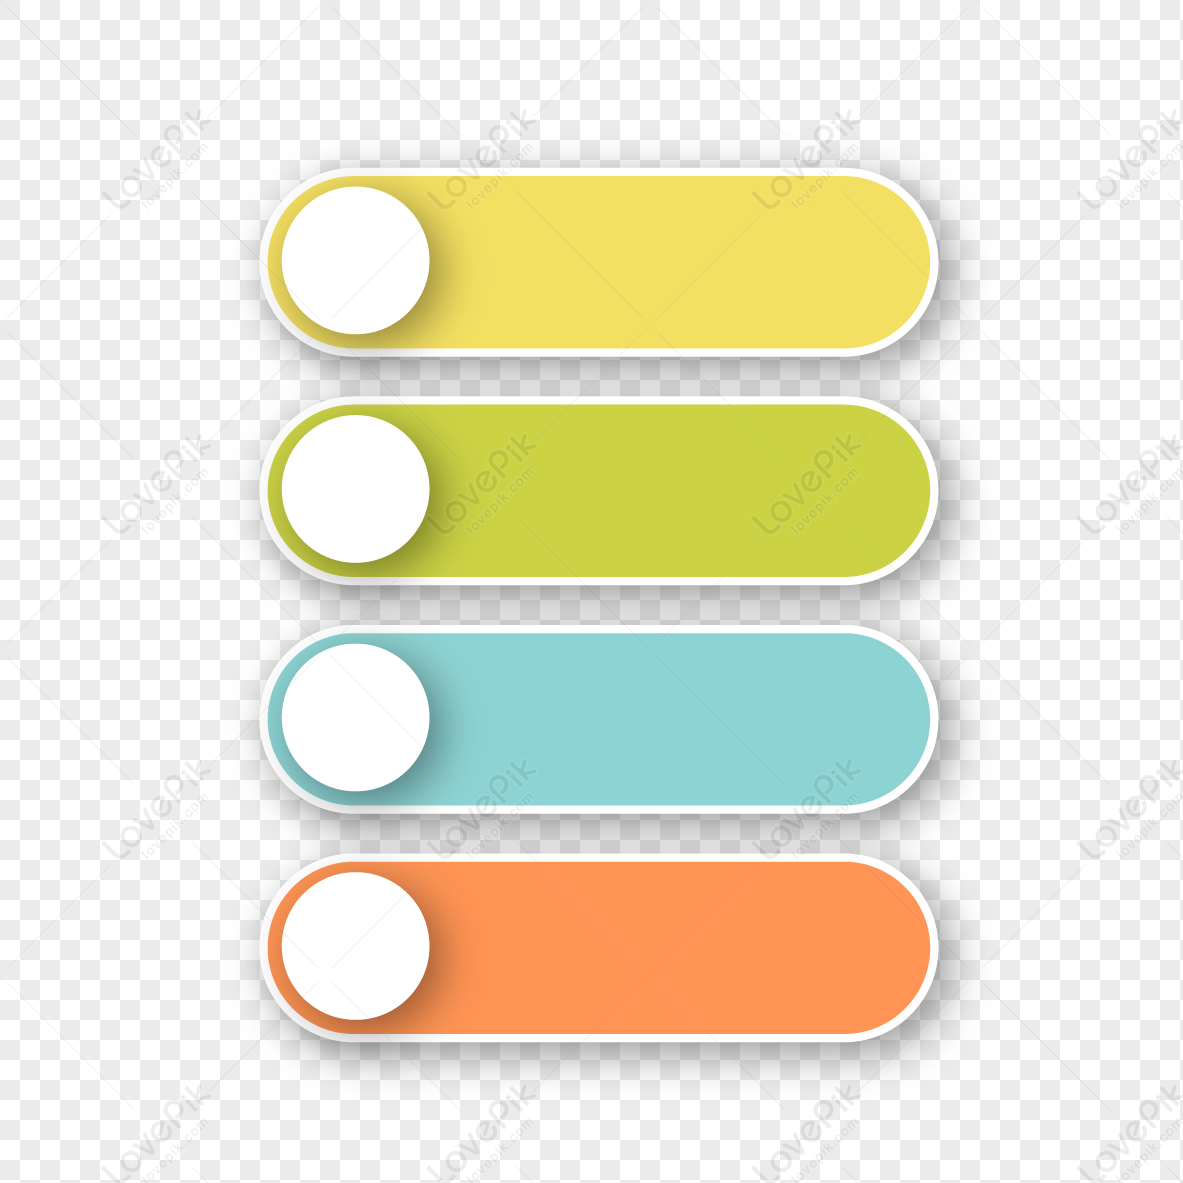 PPT tags, ppt, sequence, animation sequence png transparent background